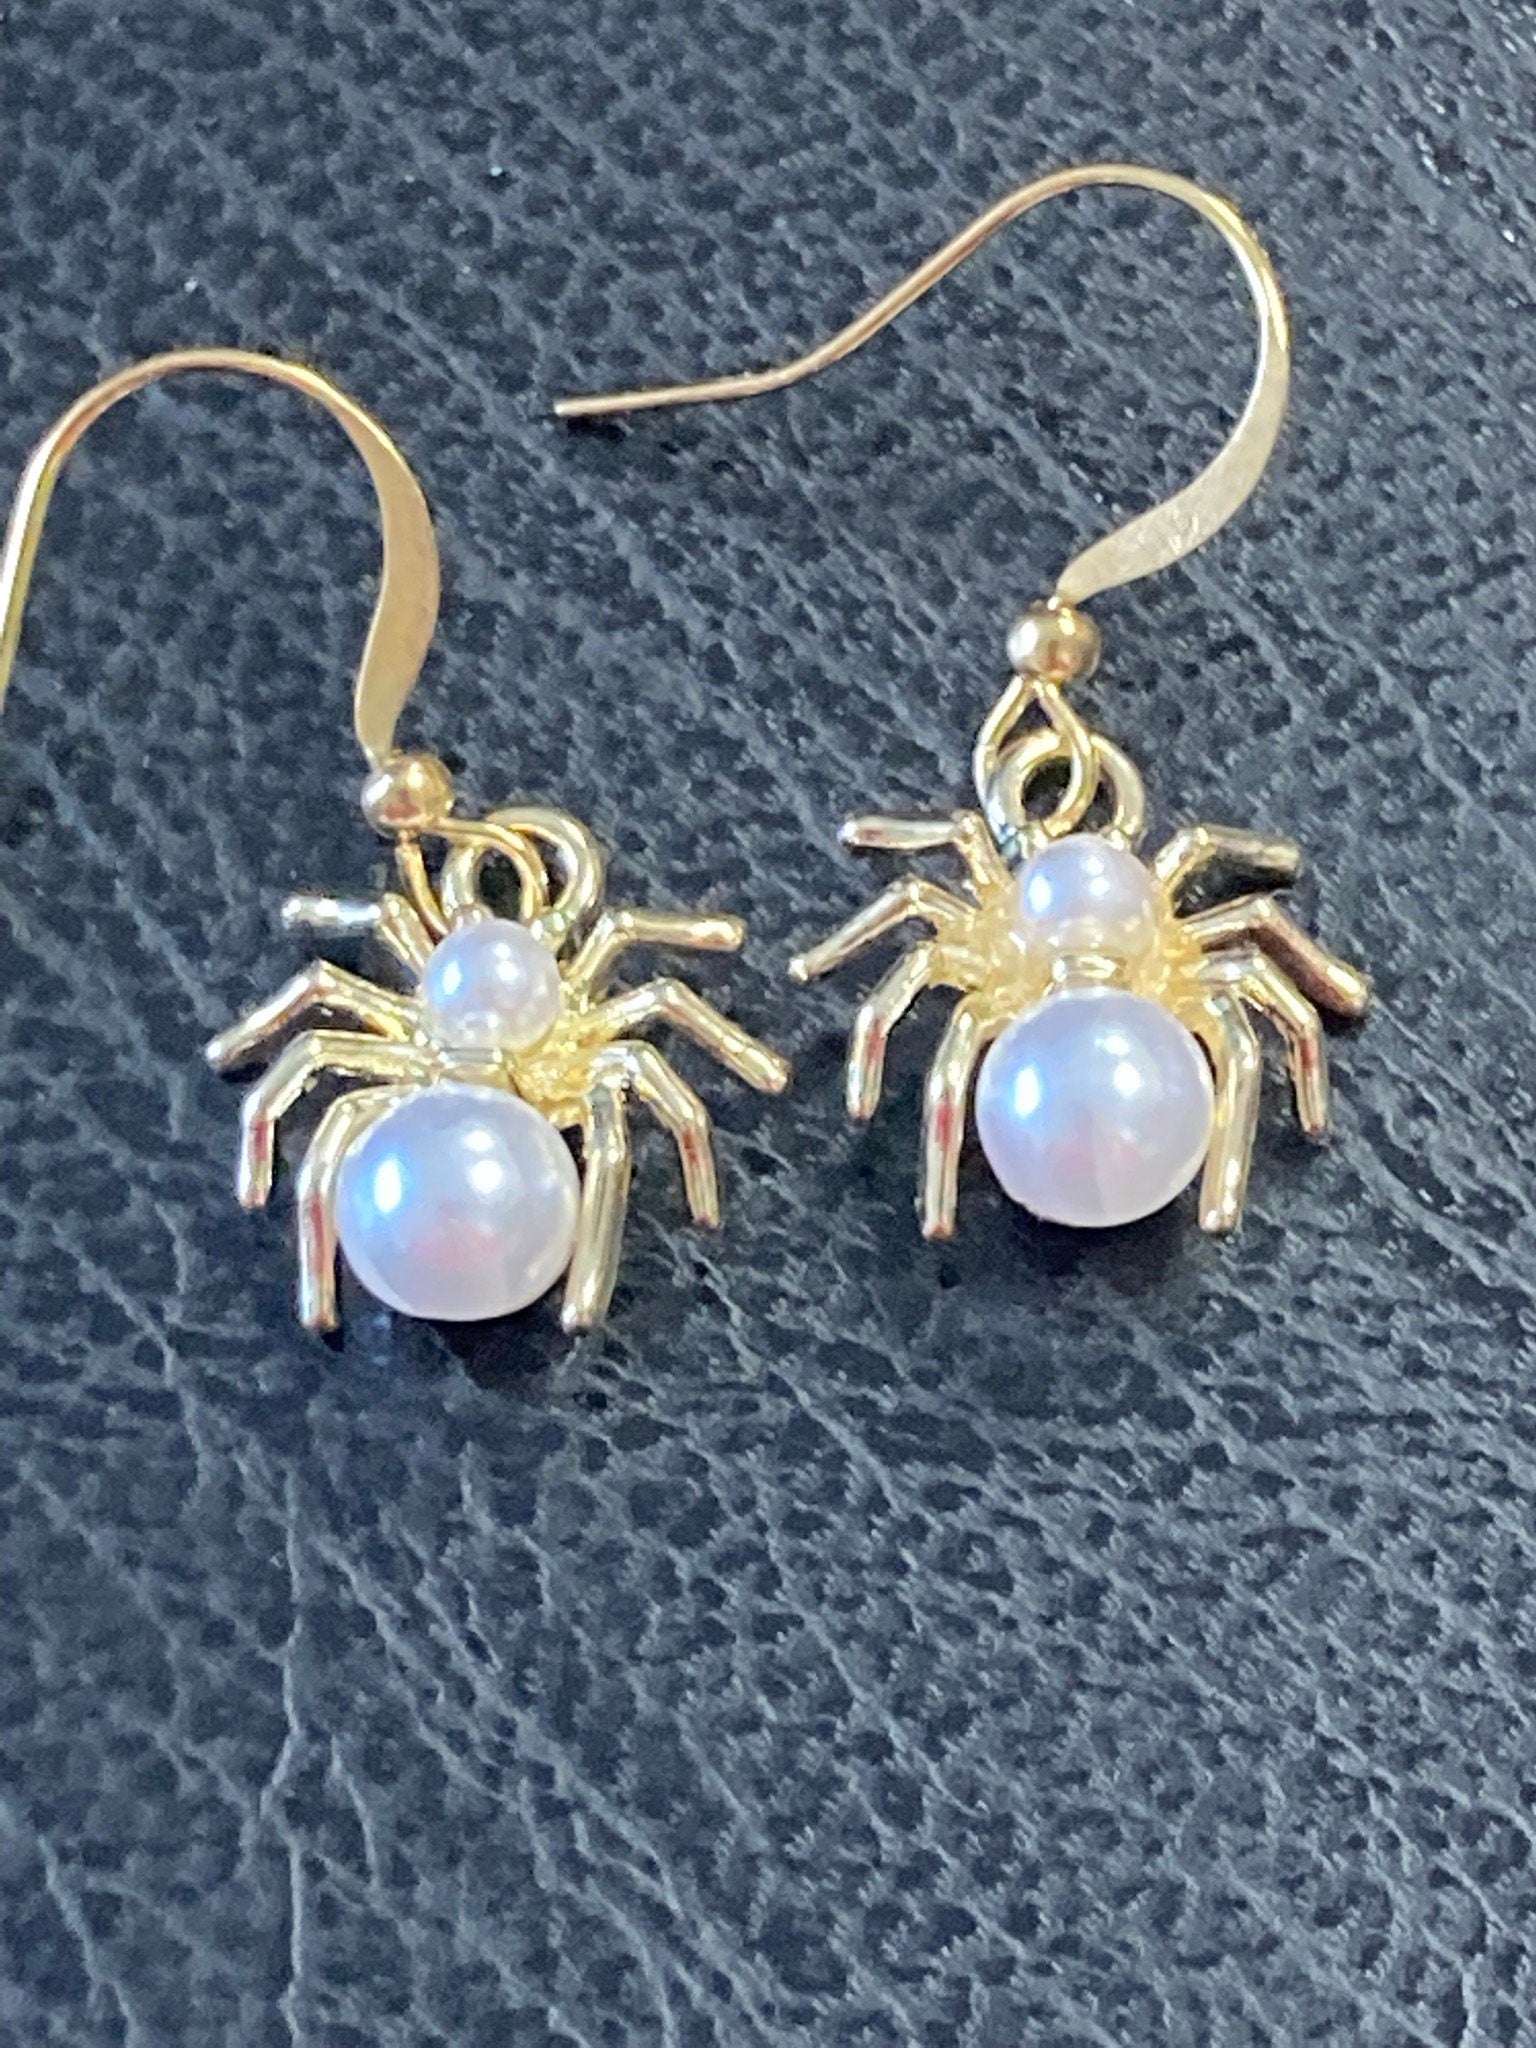 Handmade gold tone small Spooky Spider drop earrings